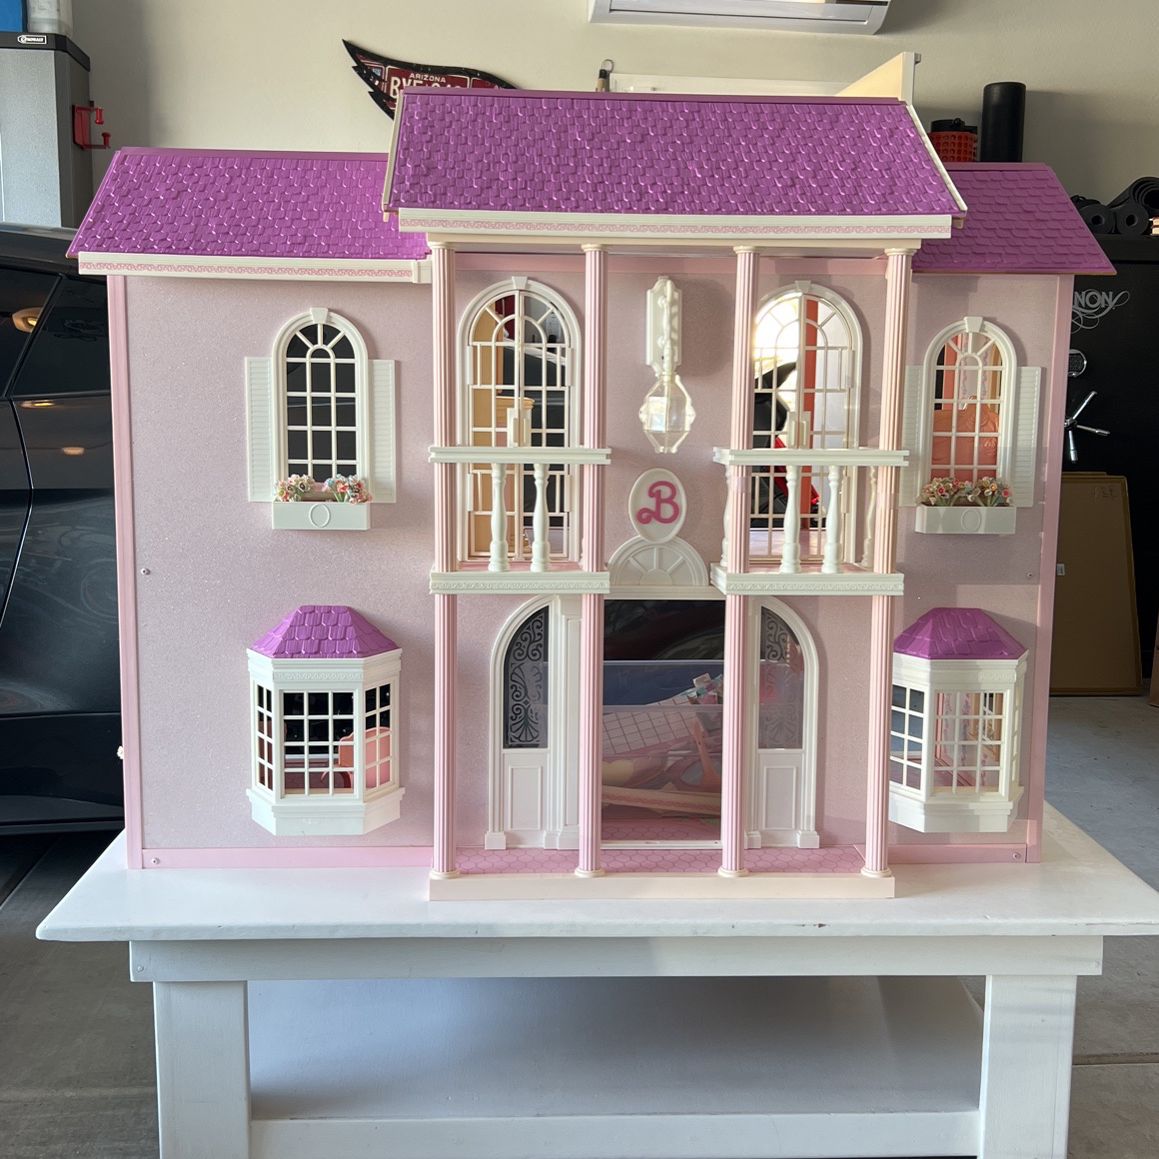 Barbie Playhouse 1980's Collectible for Sale in Peoria, AZ - OfferUp